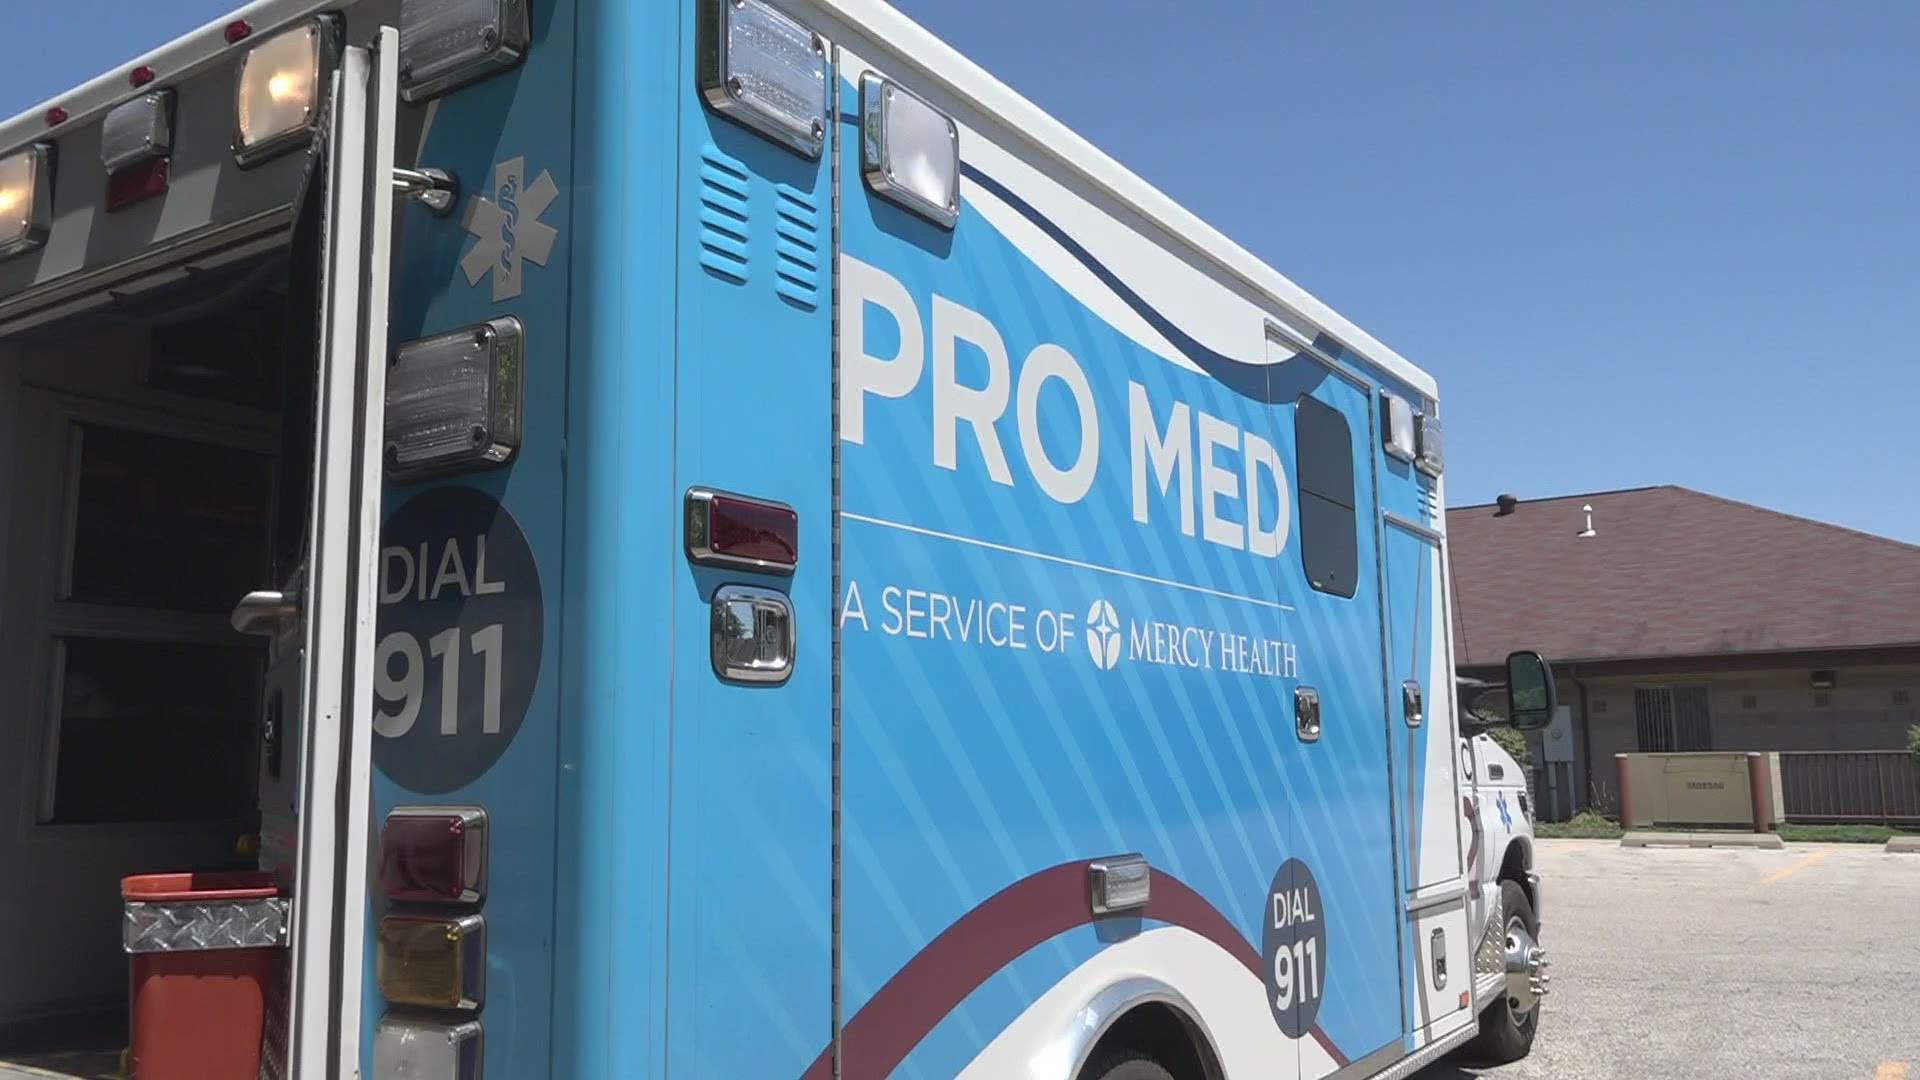 All Pro Med ambulances will have a kit starting Friday.